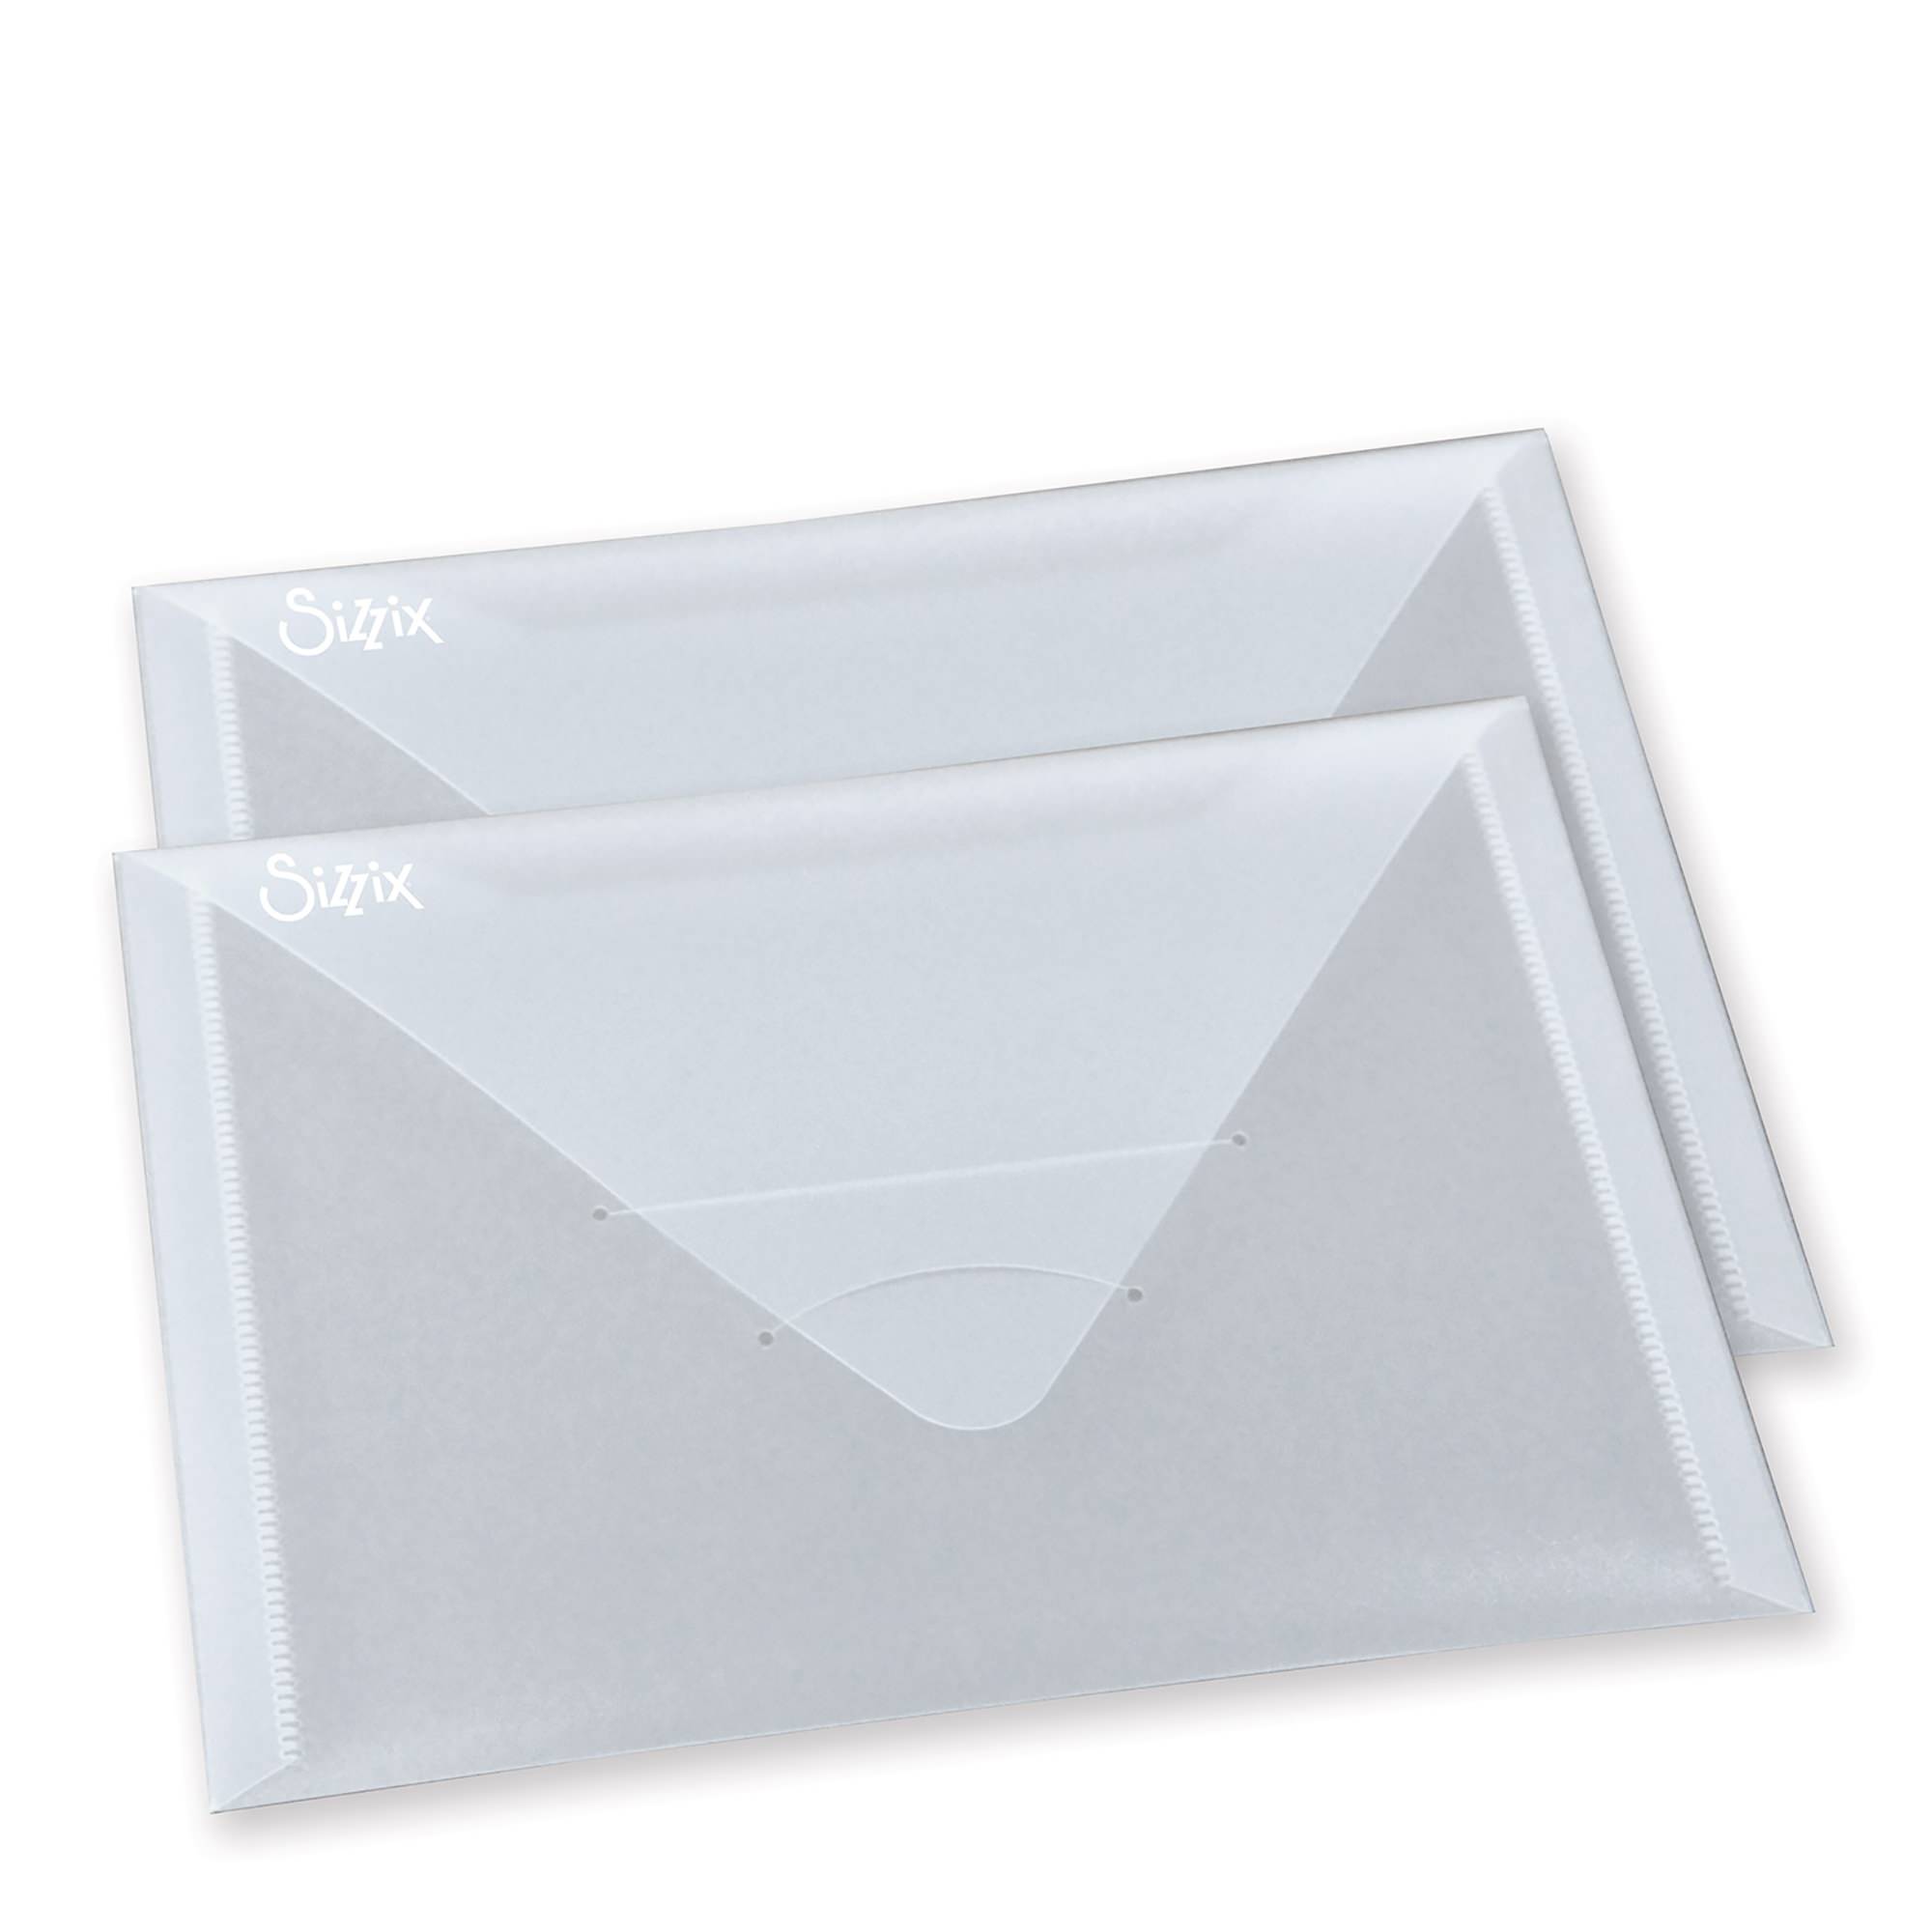 Sizzix Storage lets you stylishly keep and organize all your varied products from this company in one place. Solutions Plastic Envelopes- 2 translucent, stiff, plastic envelopes, with flaps that slide - image 1 of 2